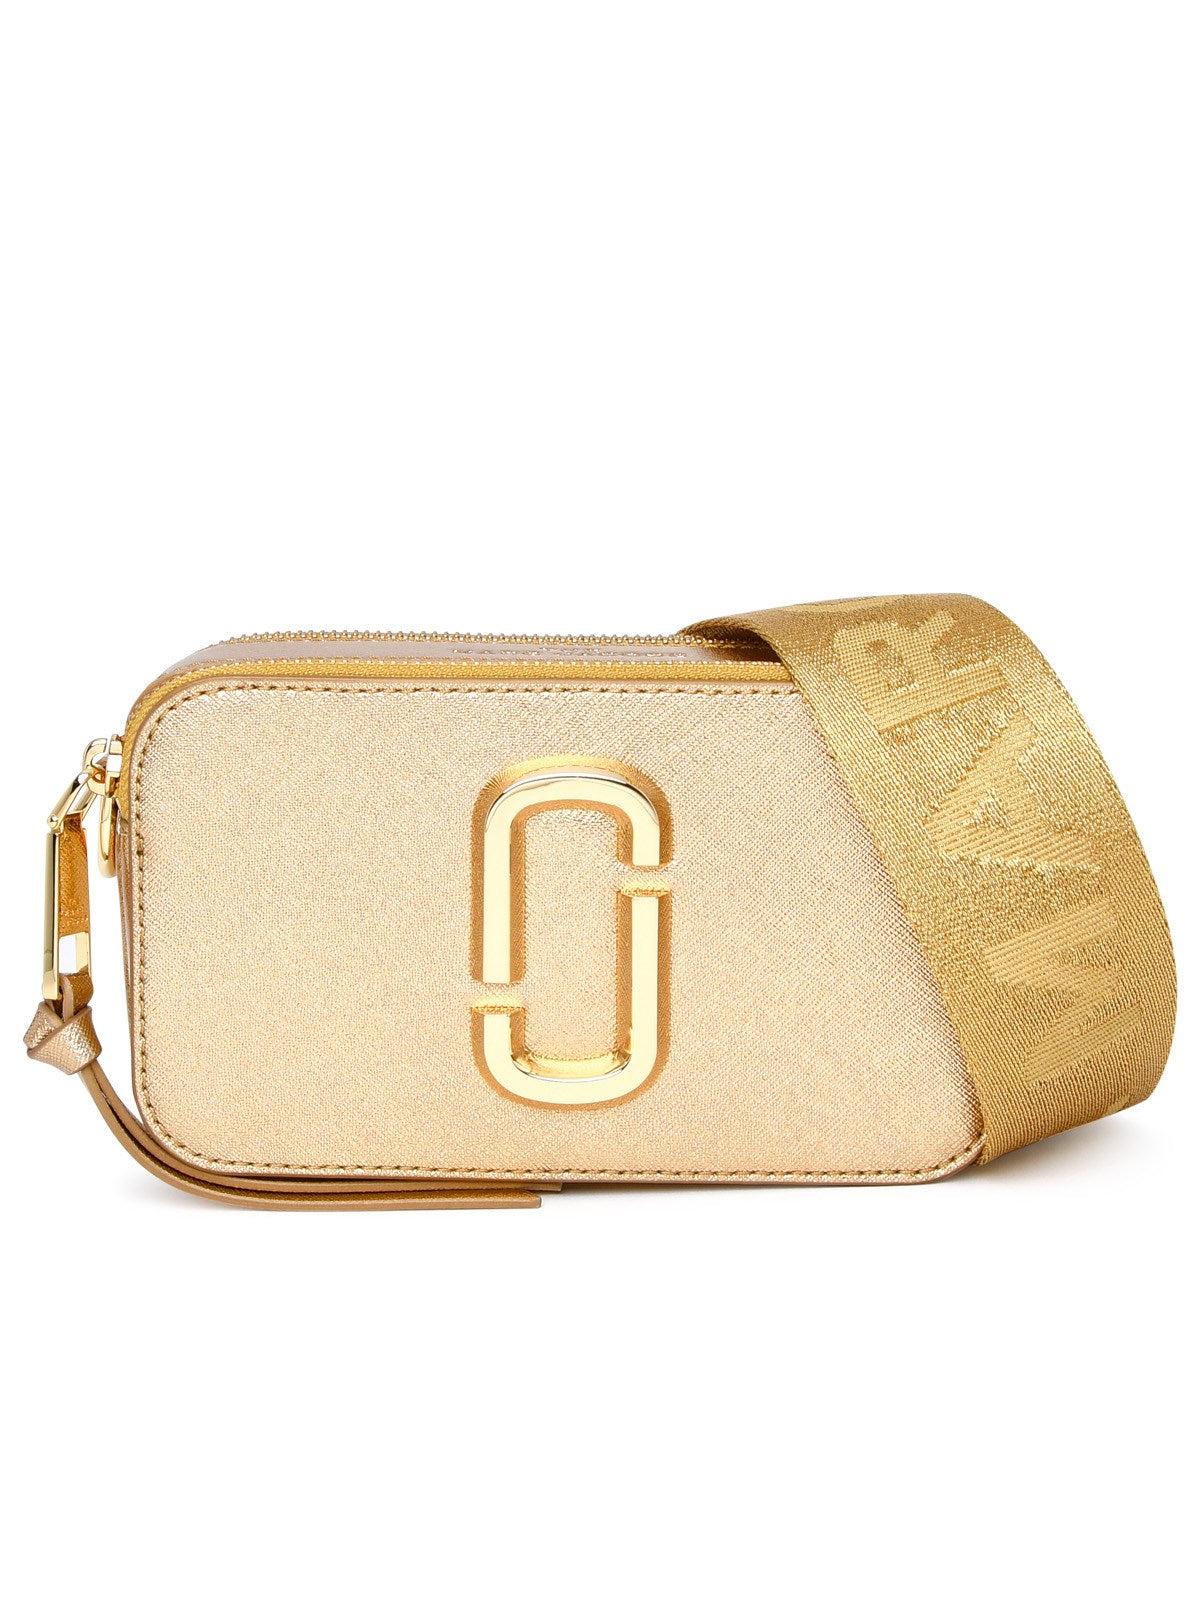 Marc Jacobs Gold Leather The Snapshot Bag in Metallic